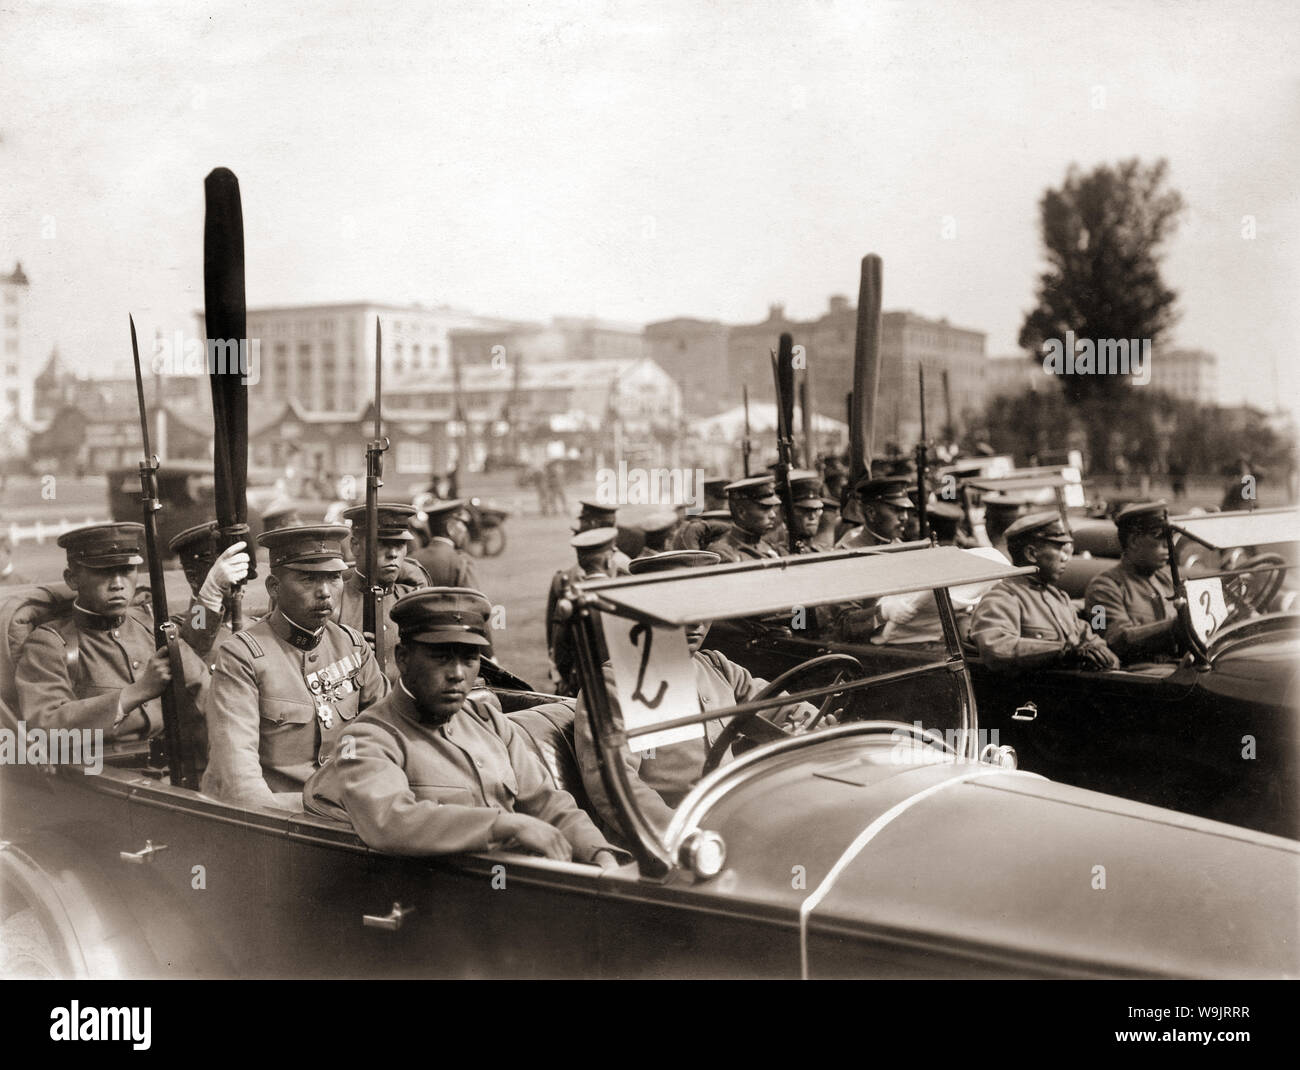 [ 1930s Japan - Japanese Soldiers in Cars ] —   Uniformed Japanese soldiers in cars hold their wrapped regimental flags. The flag bearers are flanked by soldiers holding rifles with fixed bayonets.  20th century vintage gelatin silver print. Stock Photo